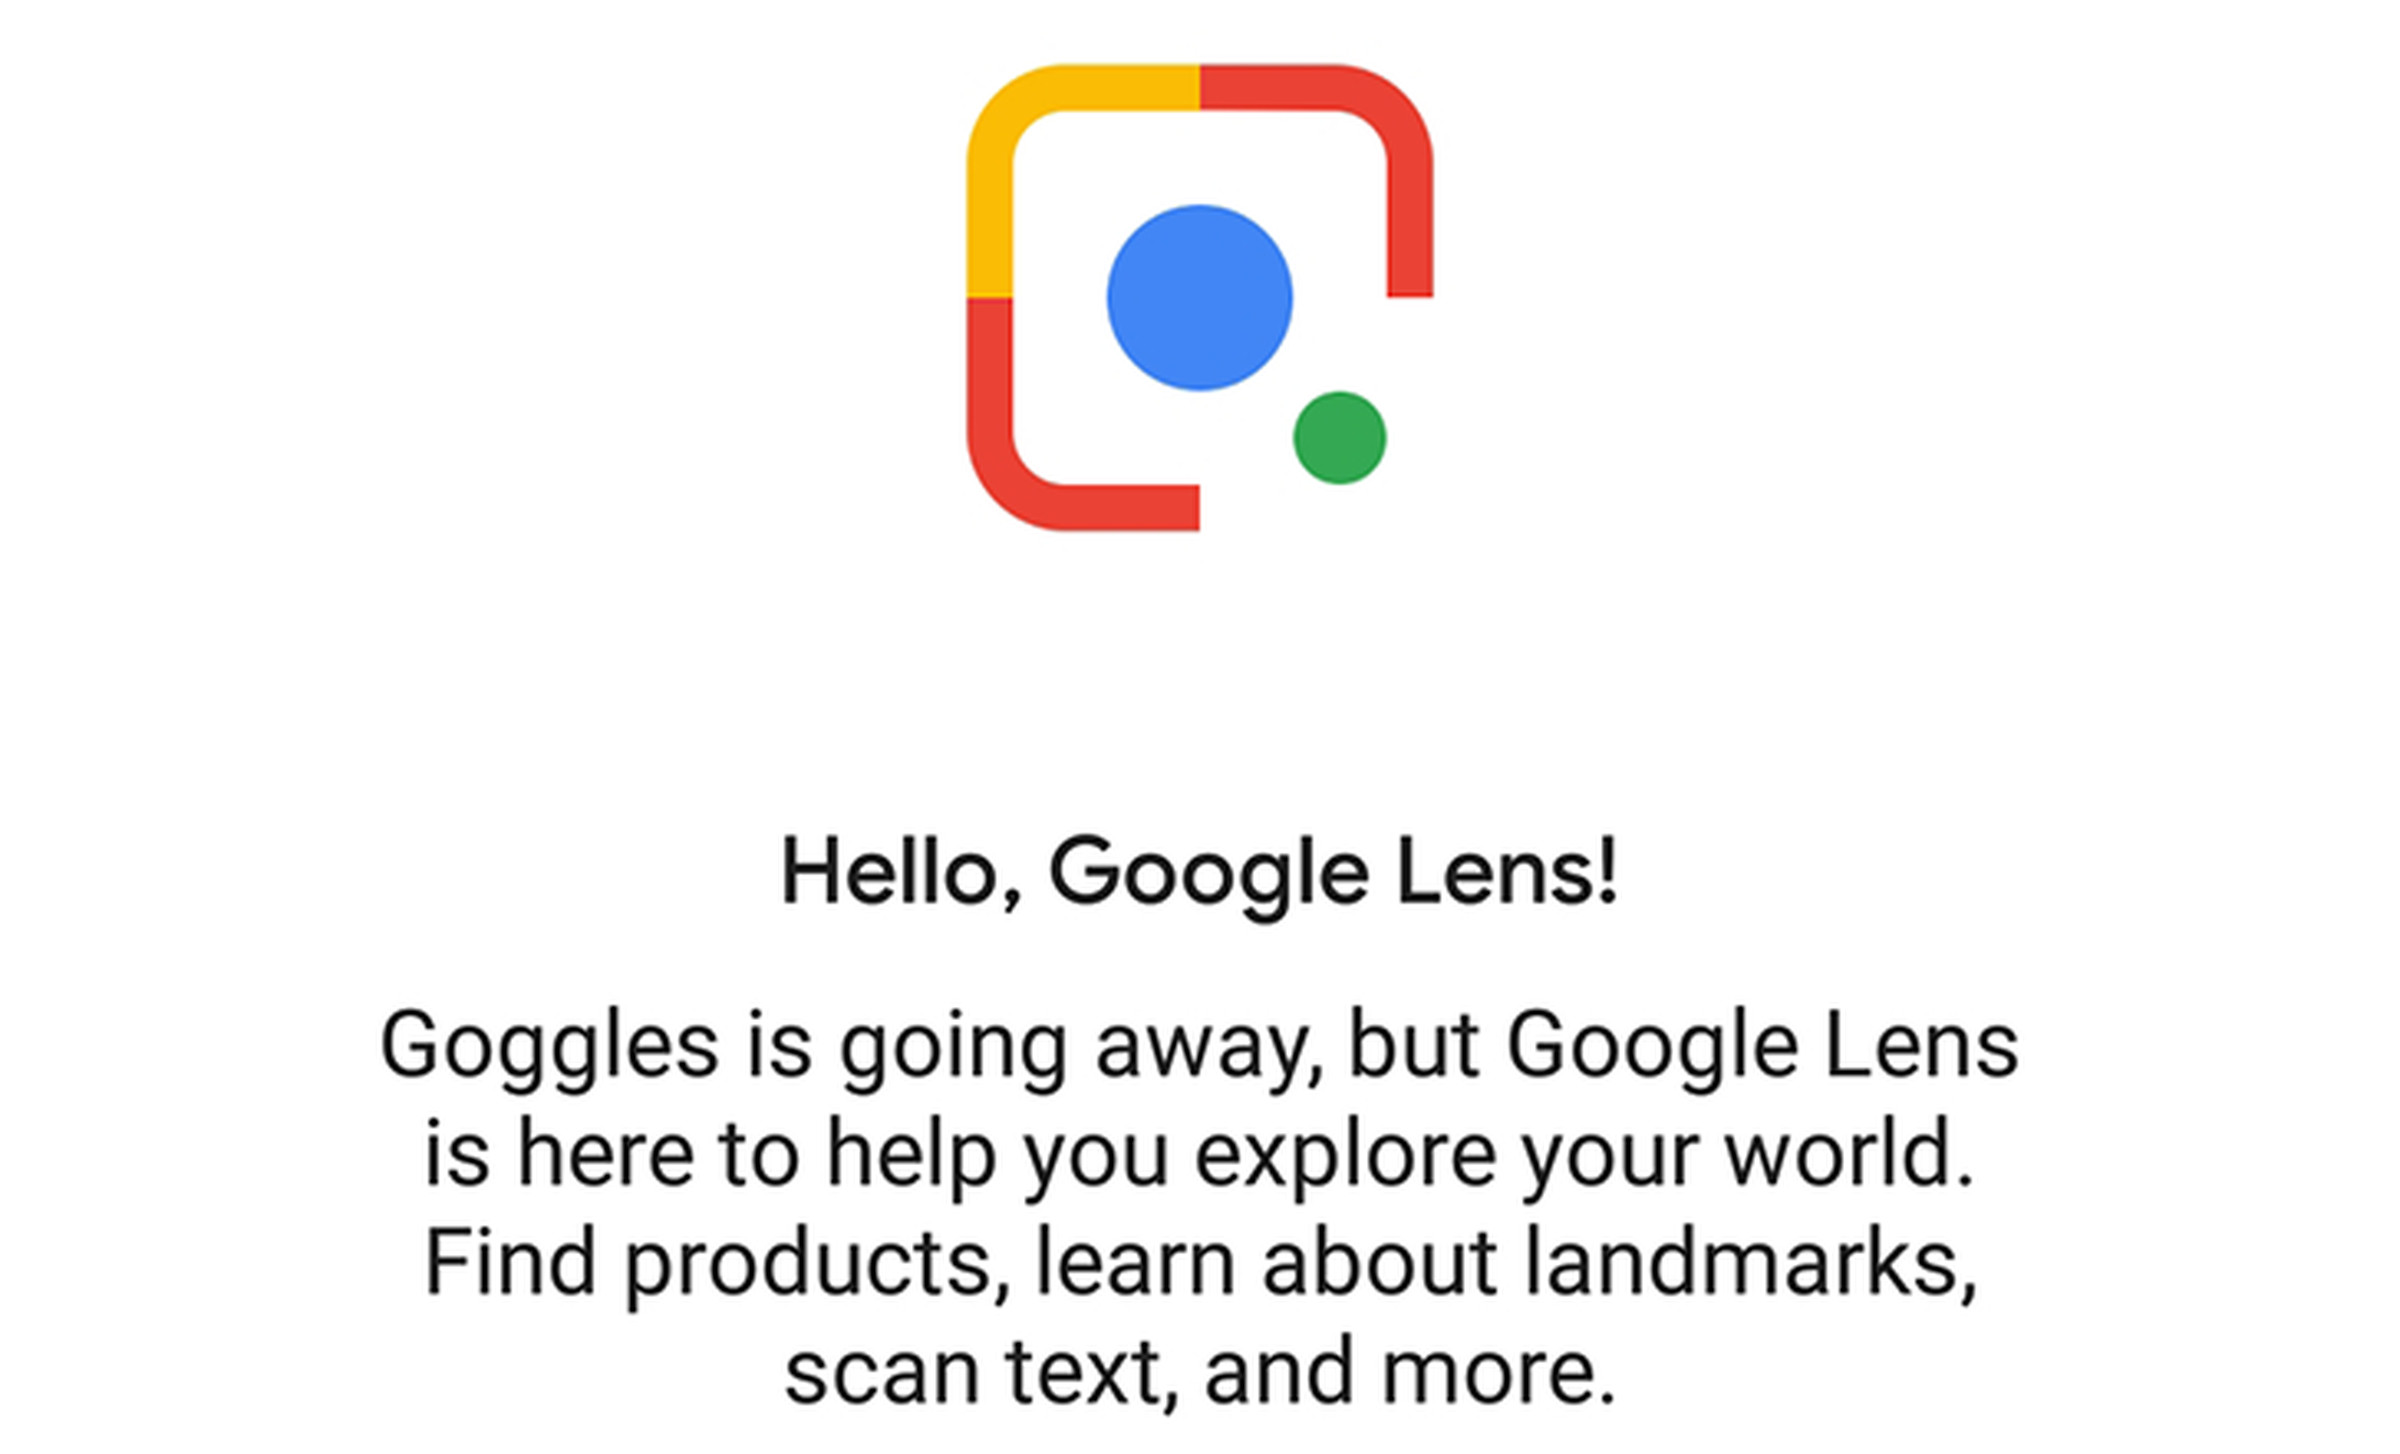 The note telling users to download Google Lens instead. 